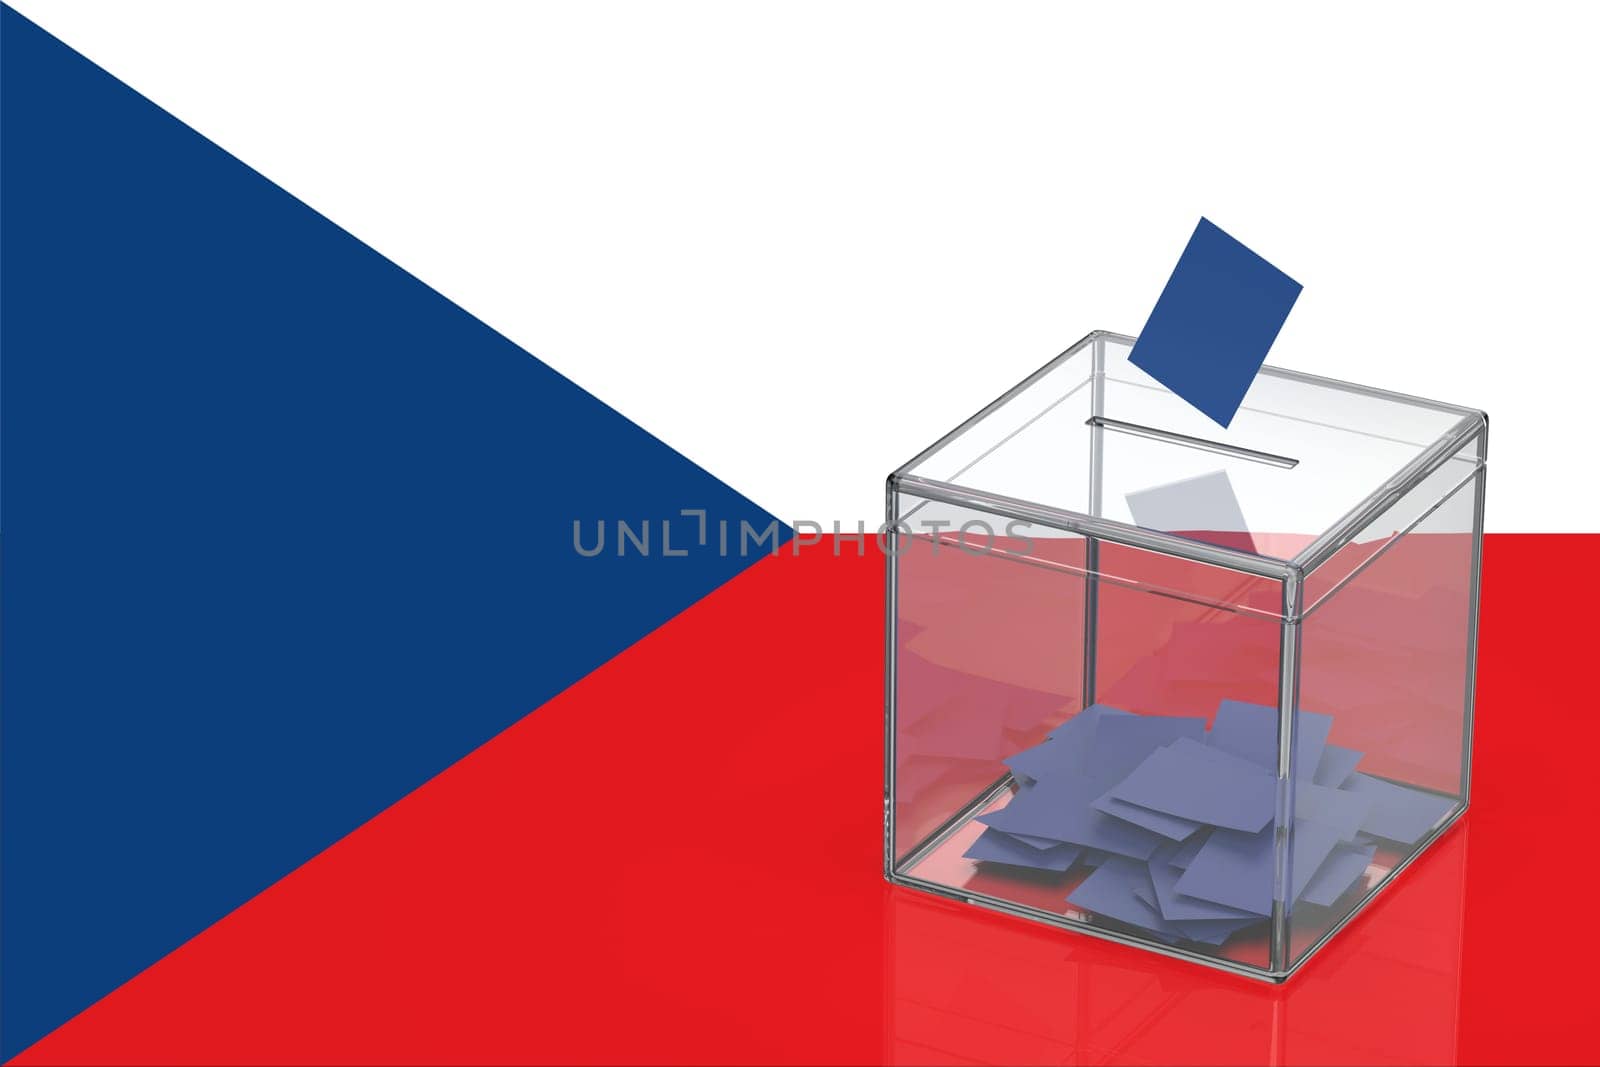 Concept image for elections in Czechia by magraphics